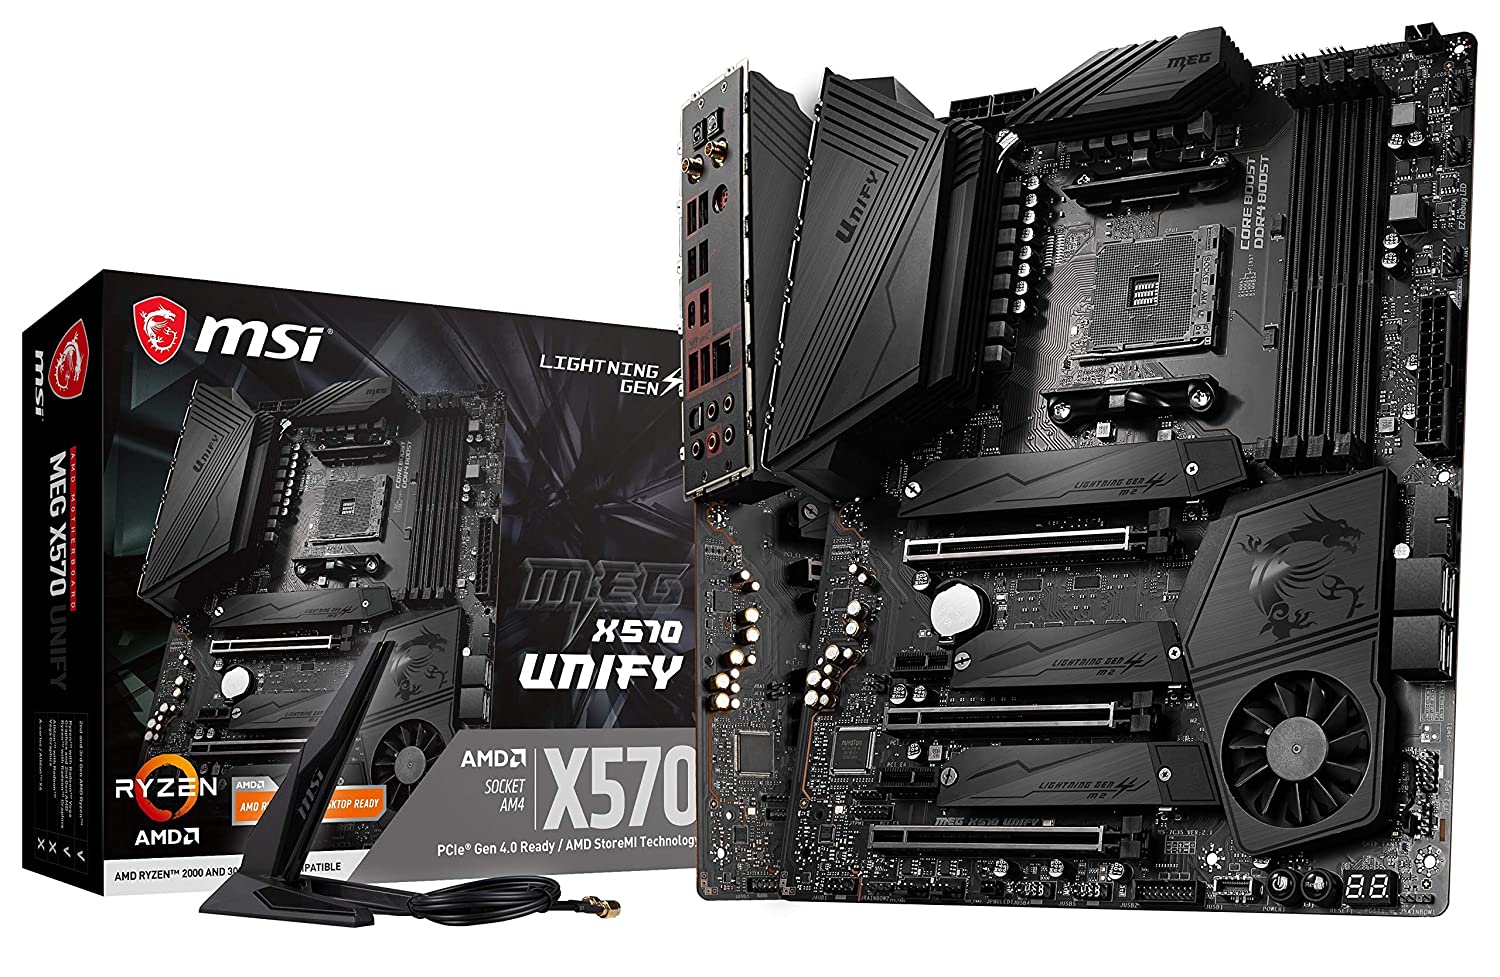 Msi MEG X570 Unify (Wi-Fi) Supports 2nd and 3rd Gen AMD Ryze/Ryzen with Radeon Vega Graphics-Motherboard-dealsplant